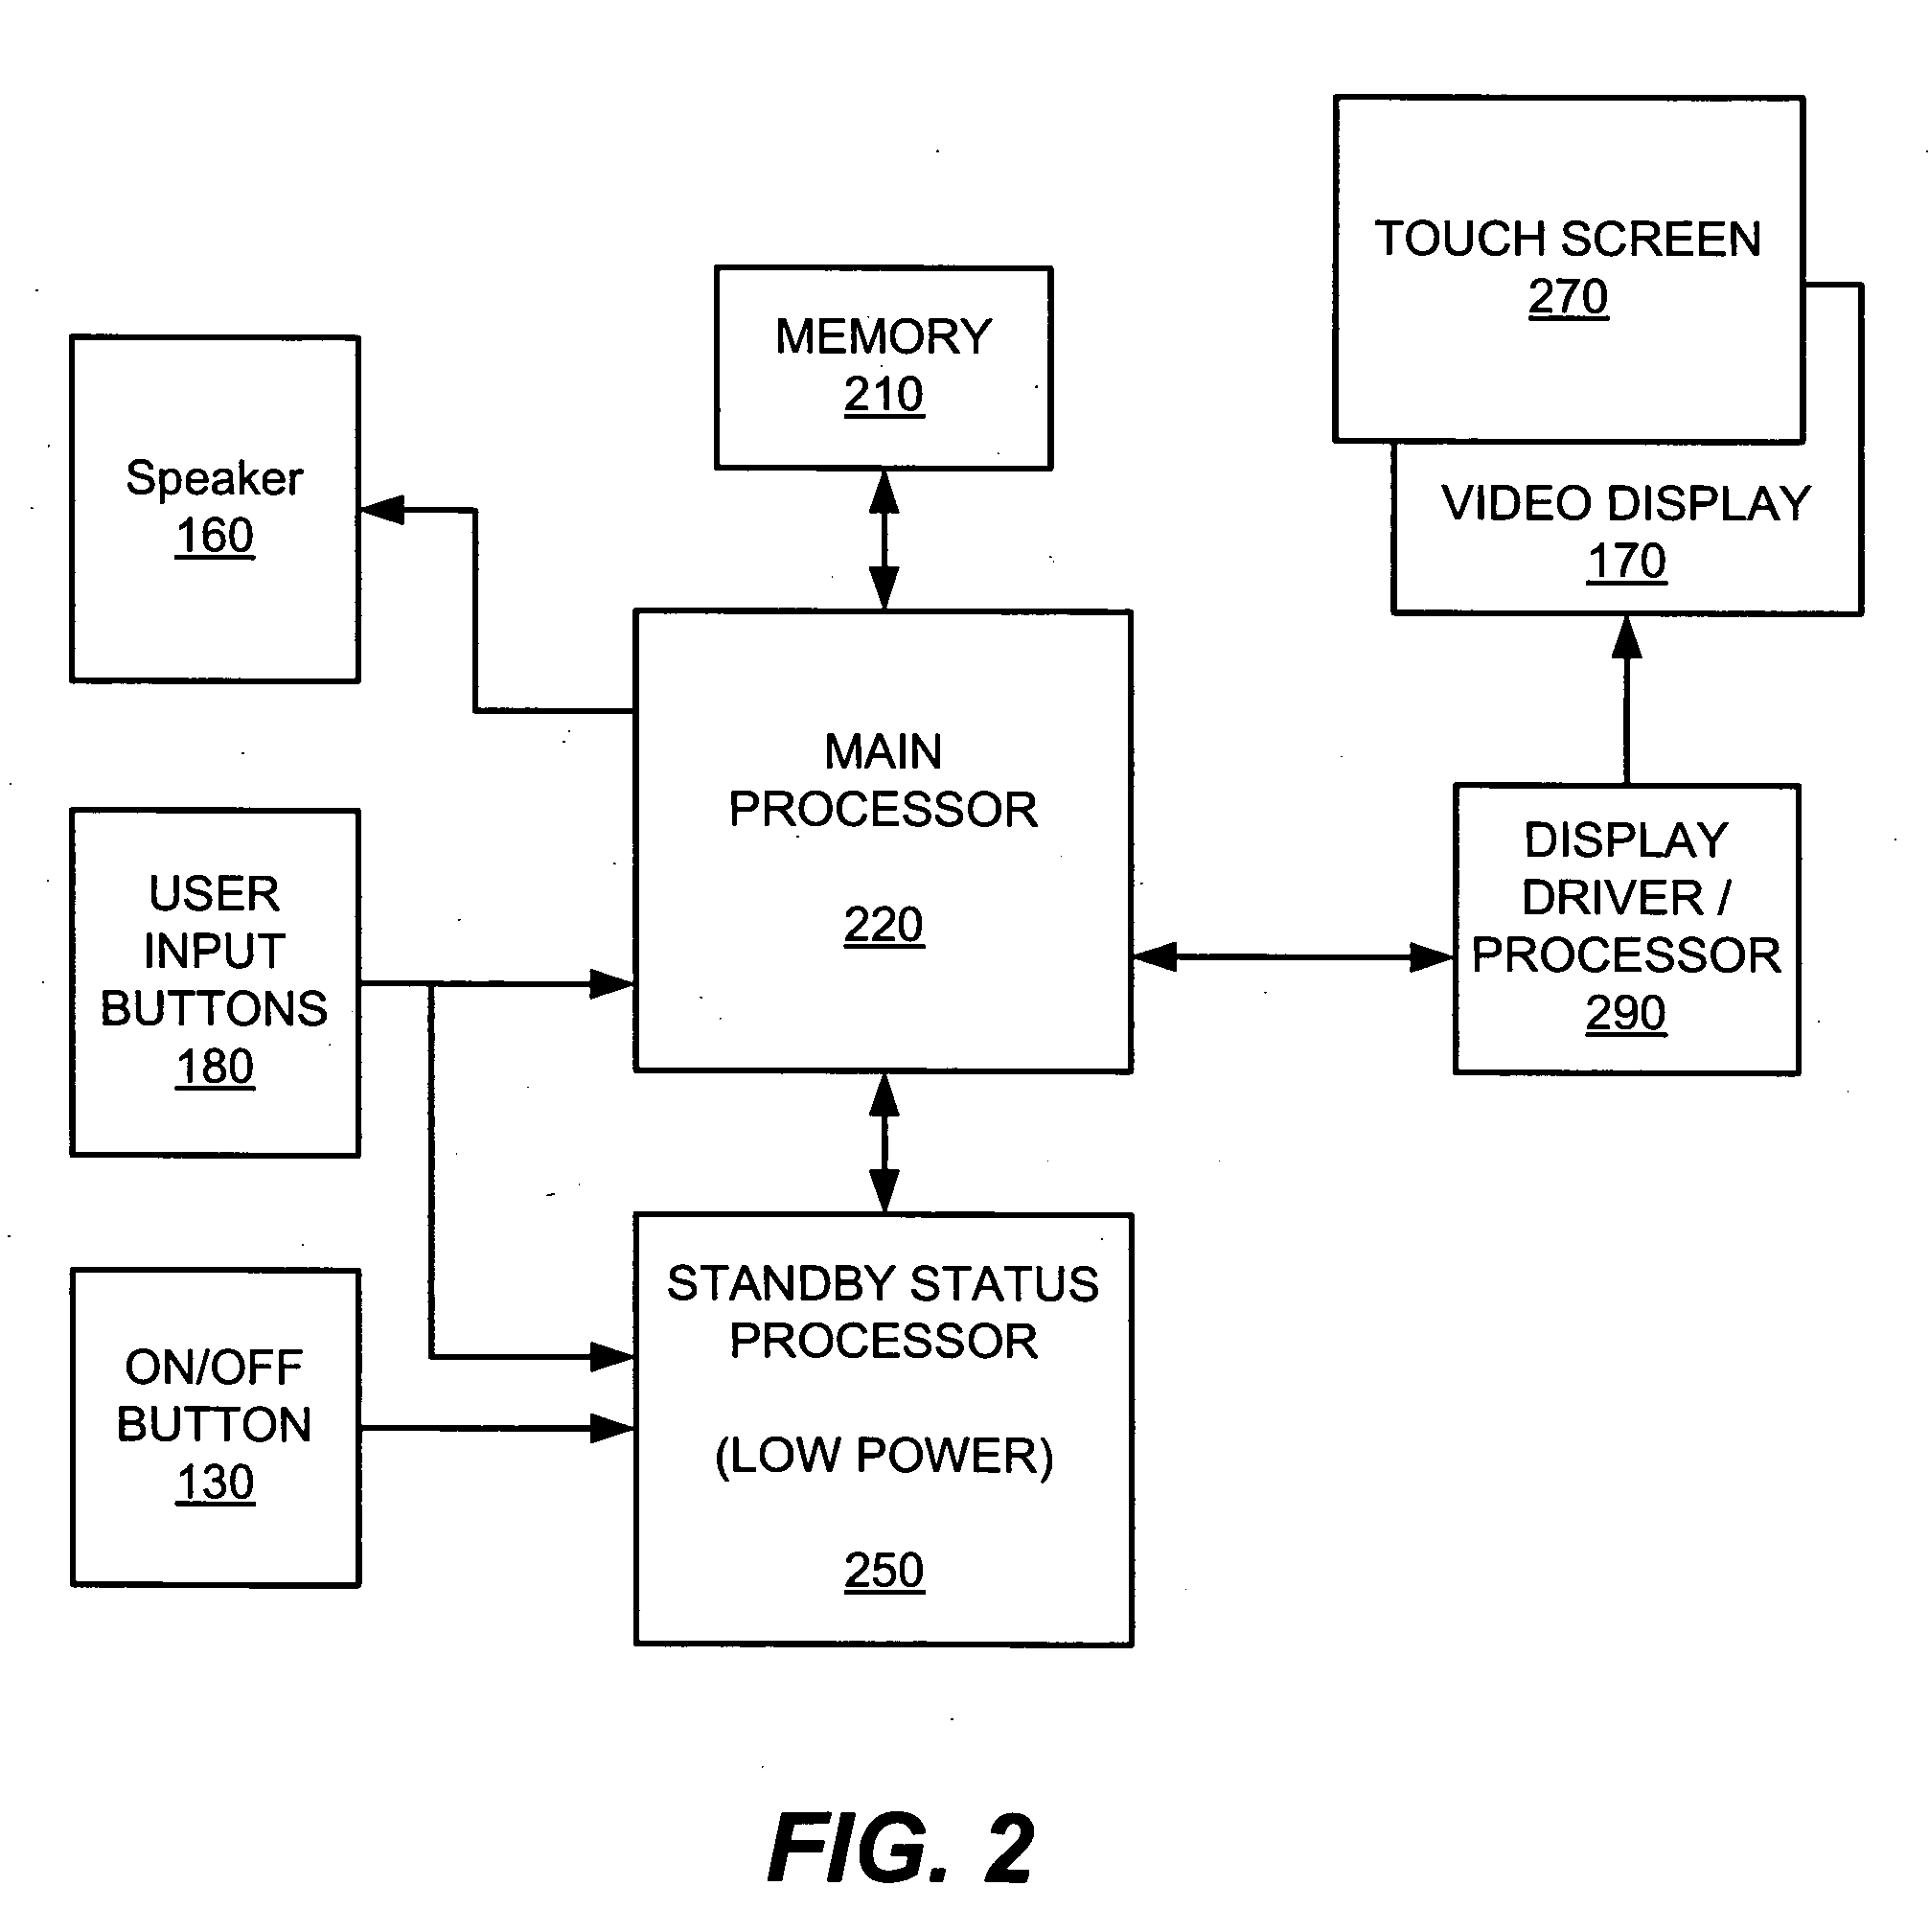 System and method for presenting defibrillator status information while in standby mode